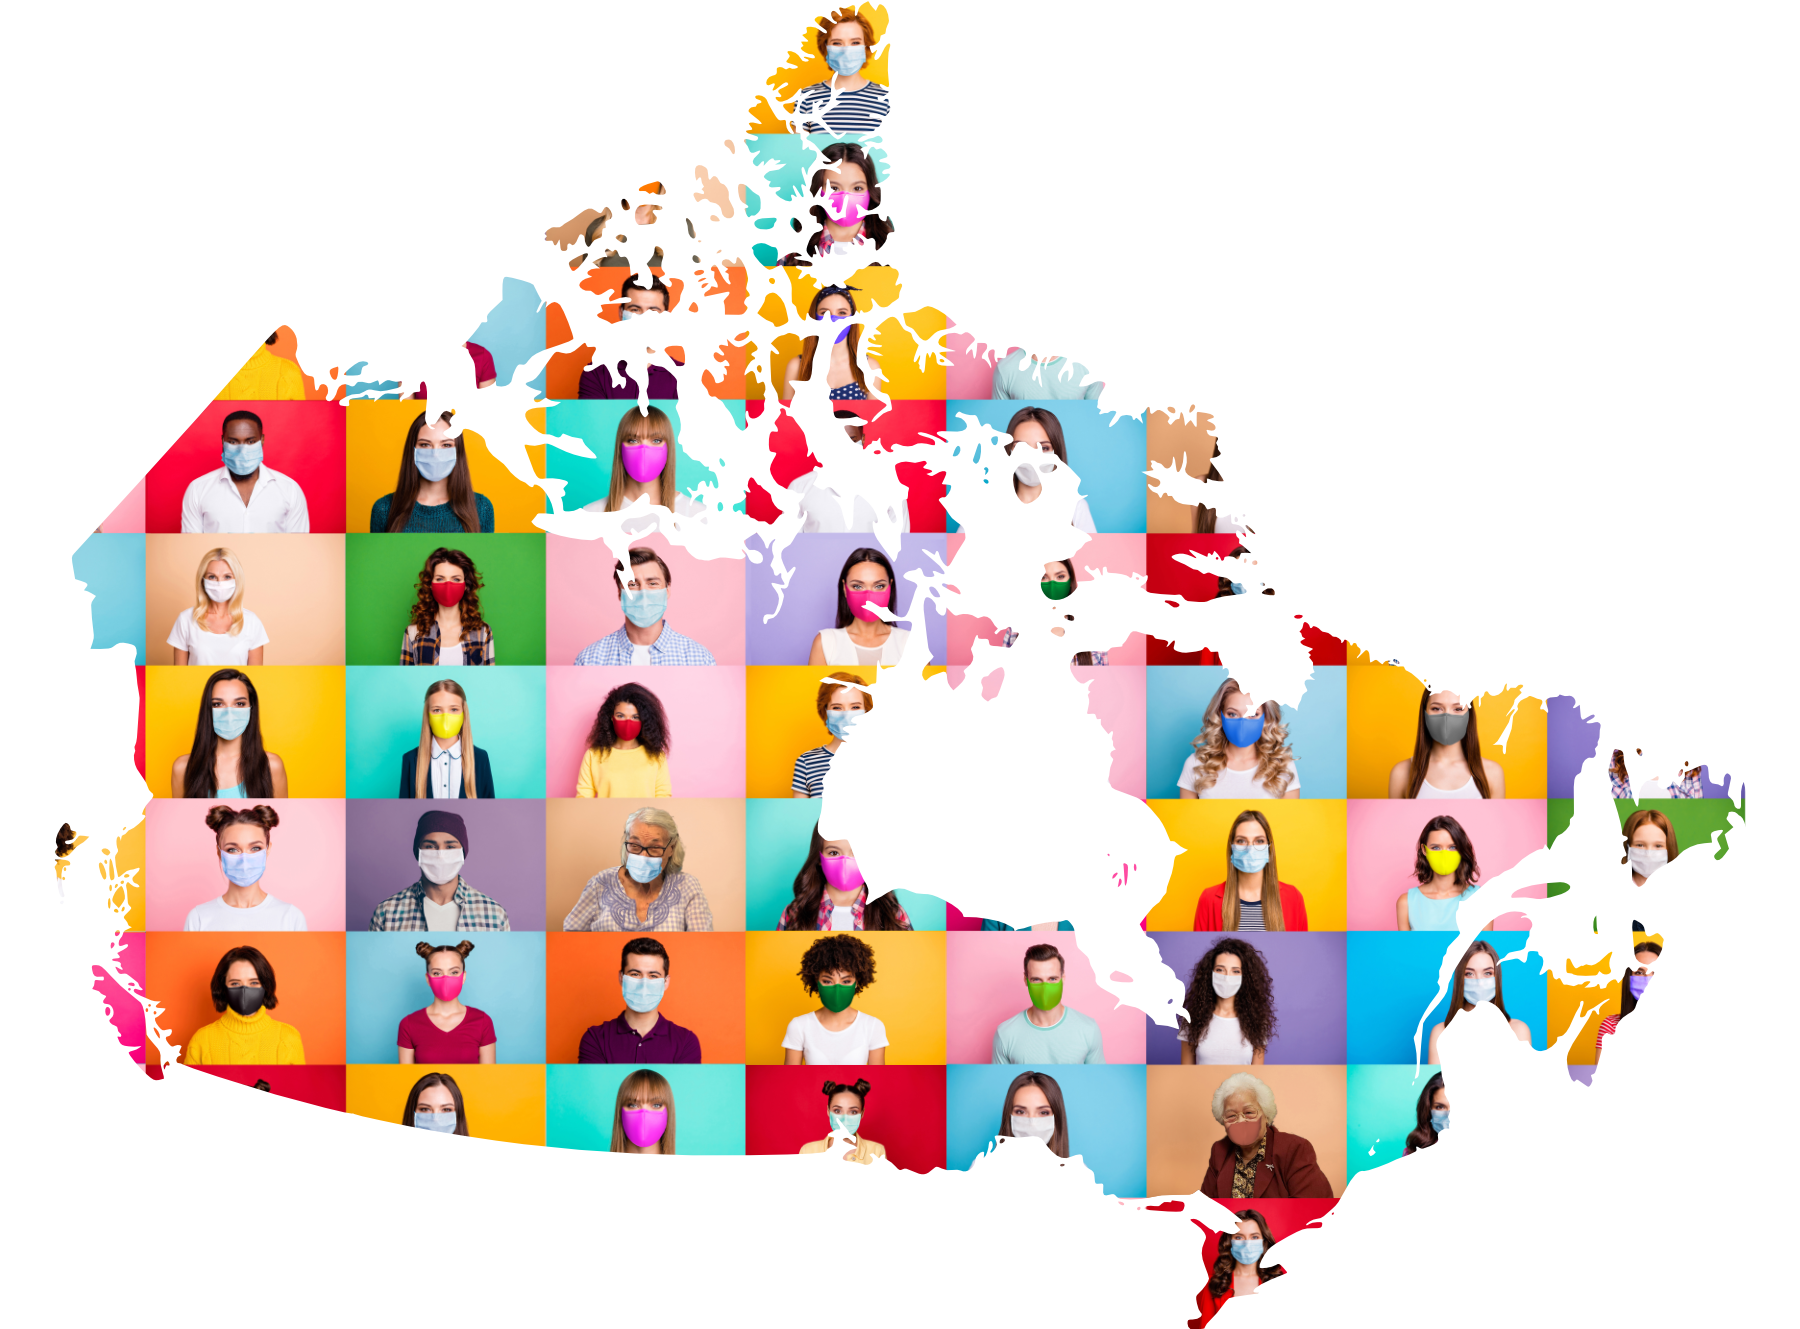 Map of Canada containing socially distanced, mask-wearing Canadians